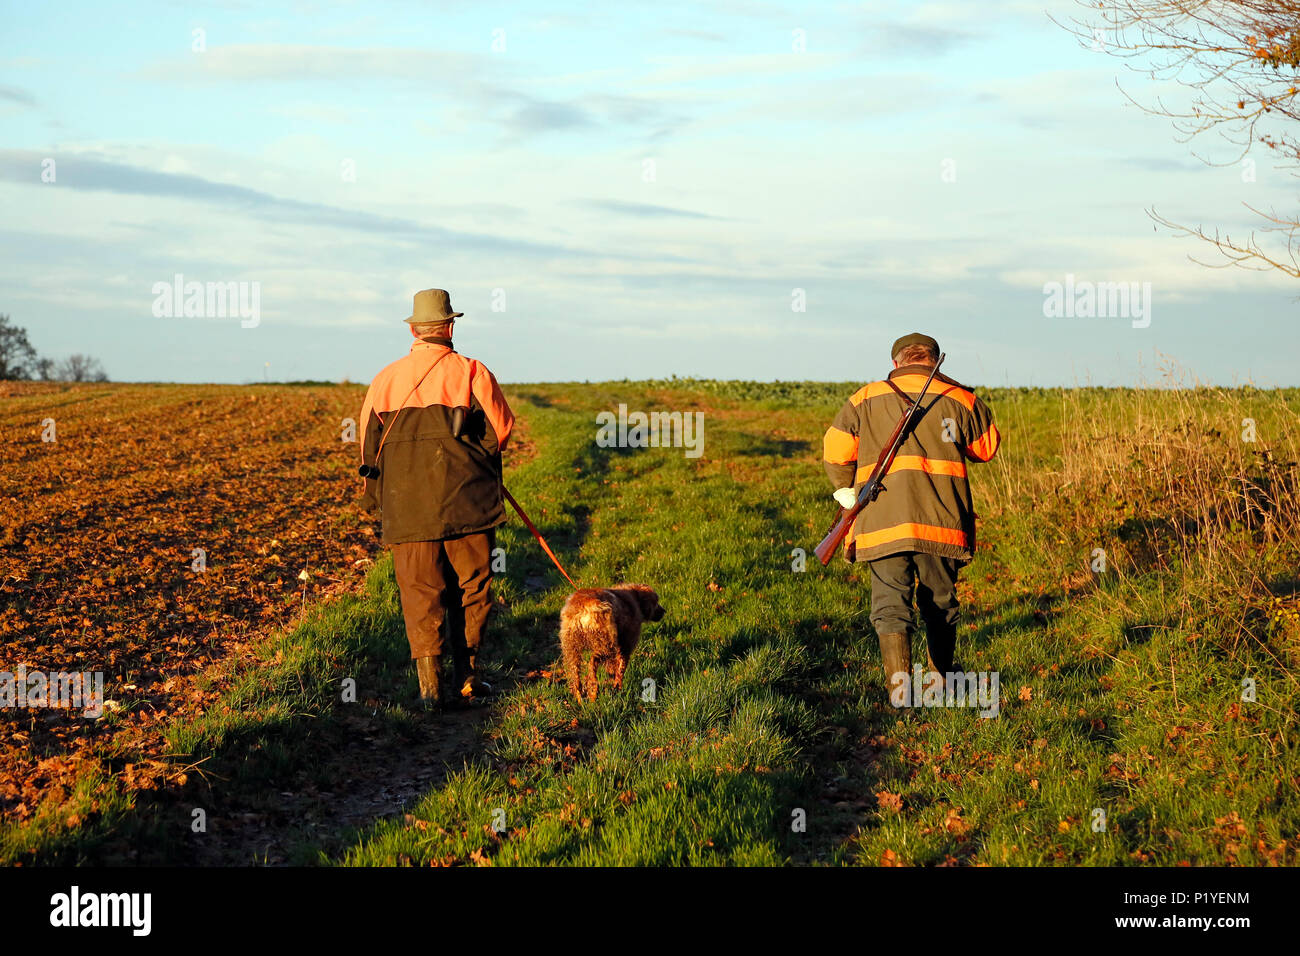 Department of Aisne. Big game hunting season (autumn). Hunters walking to the monitoring site. Stock Photo